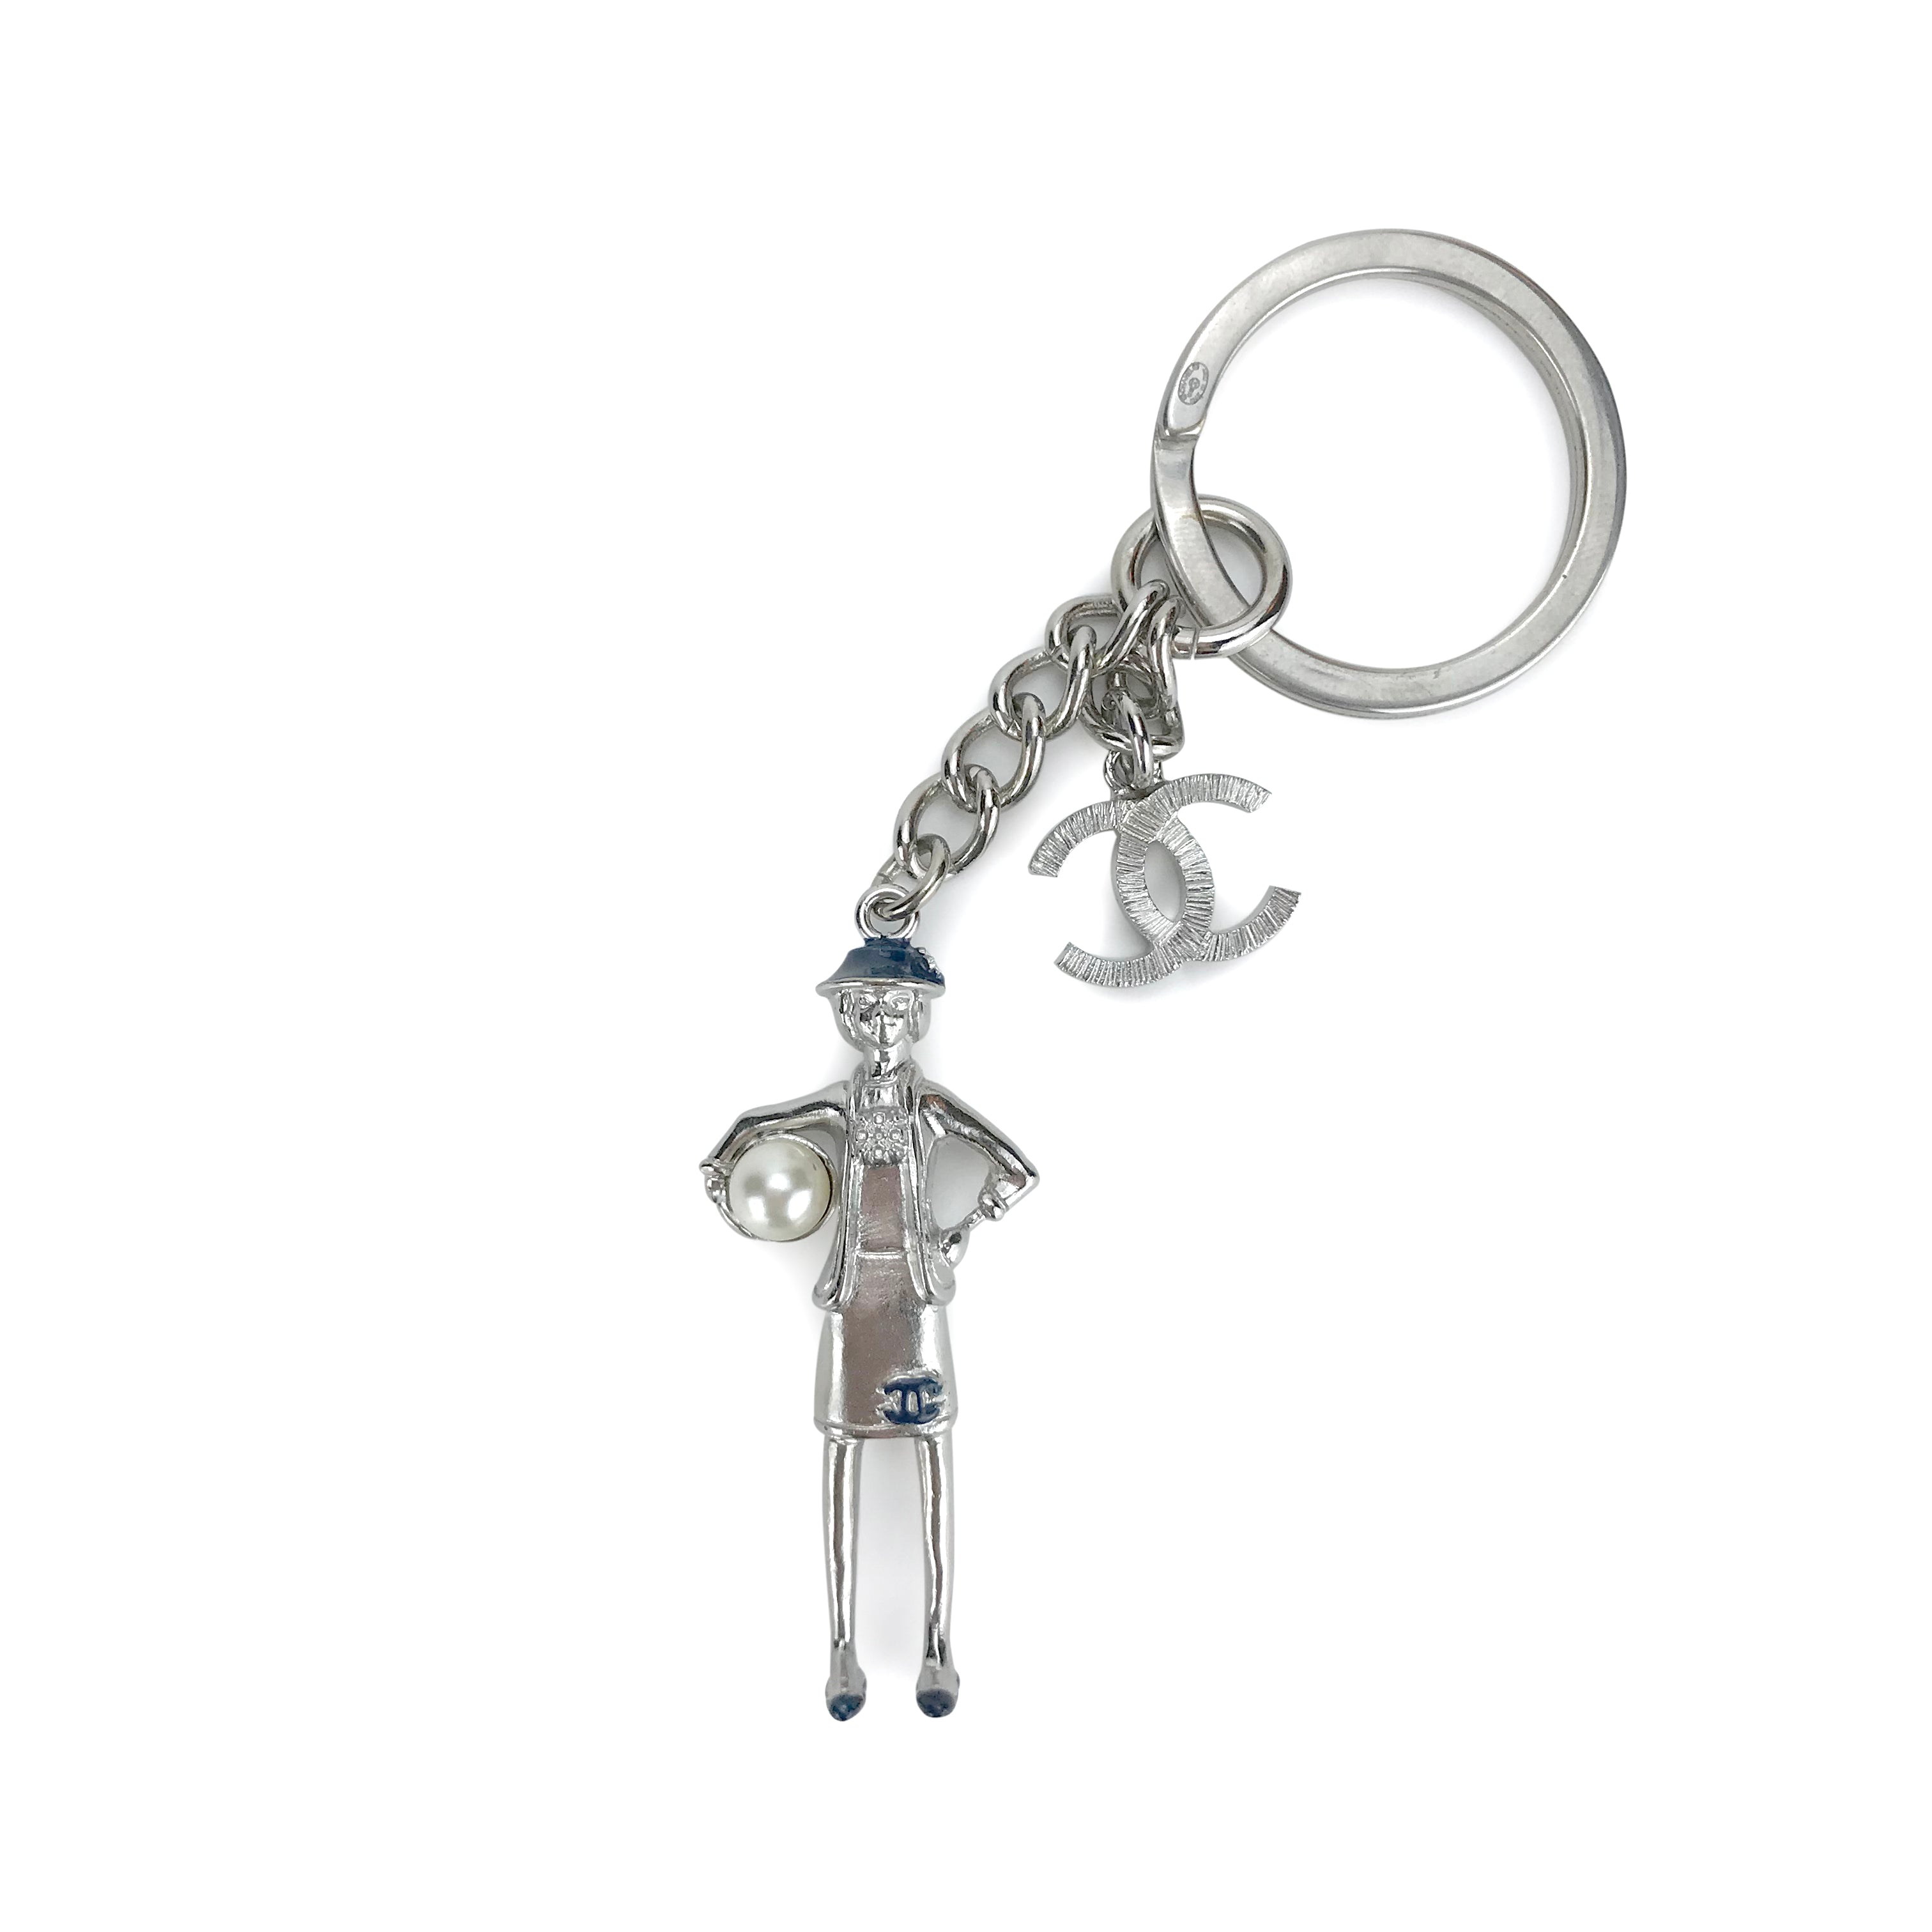 CHANEL Coco Chanel mademoiselle key ring holder/charm with CC logo